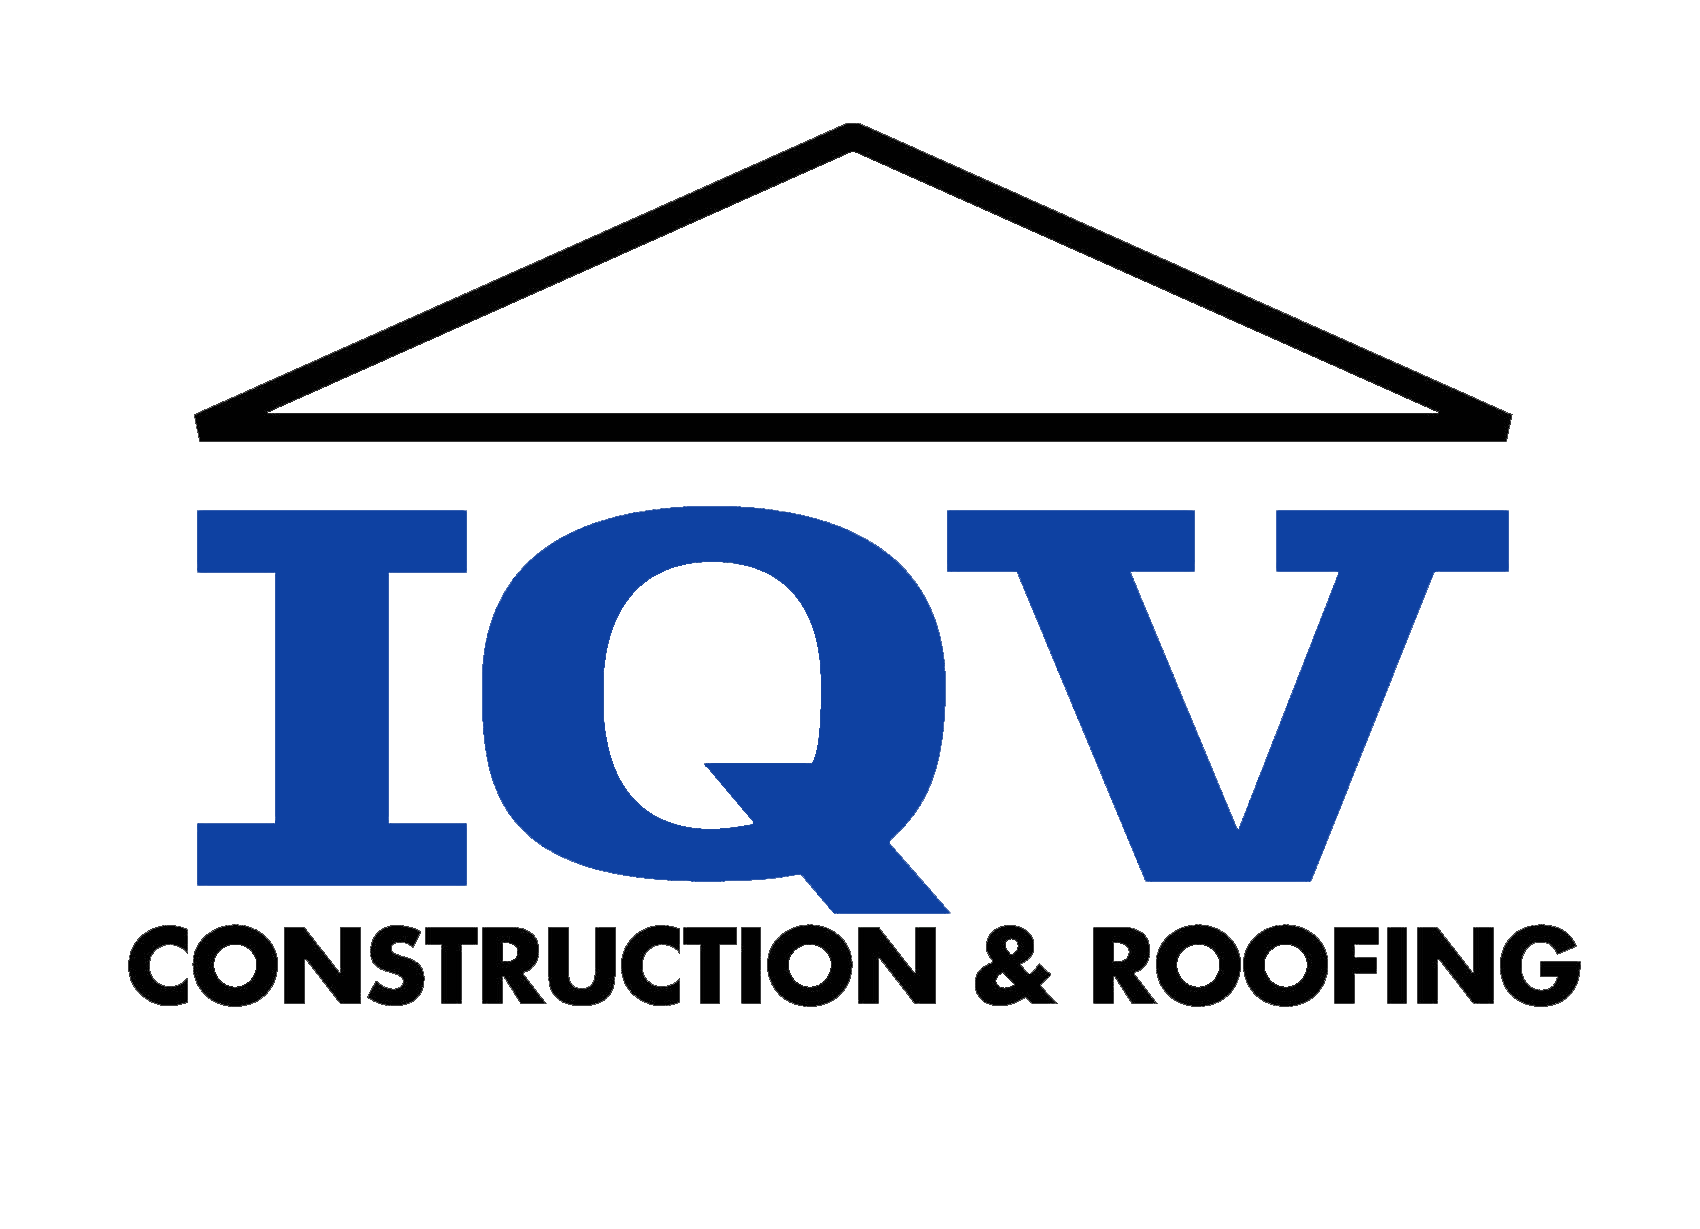 IQV Construction & Roofing San Jose CA General Contractor Apartment Multifamily HOA